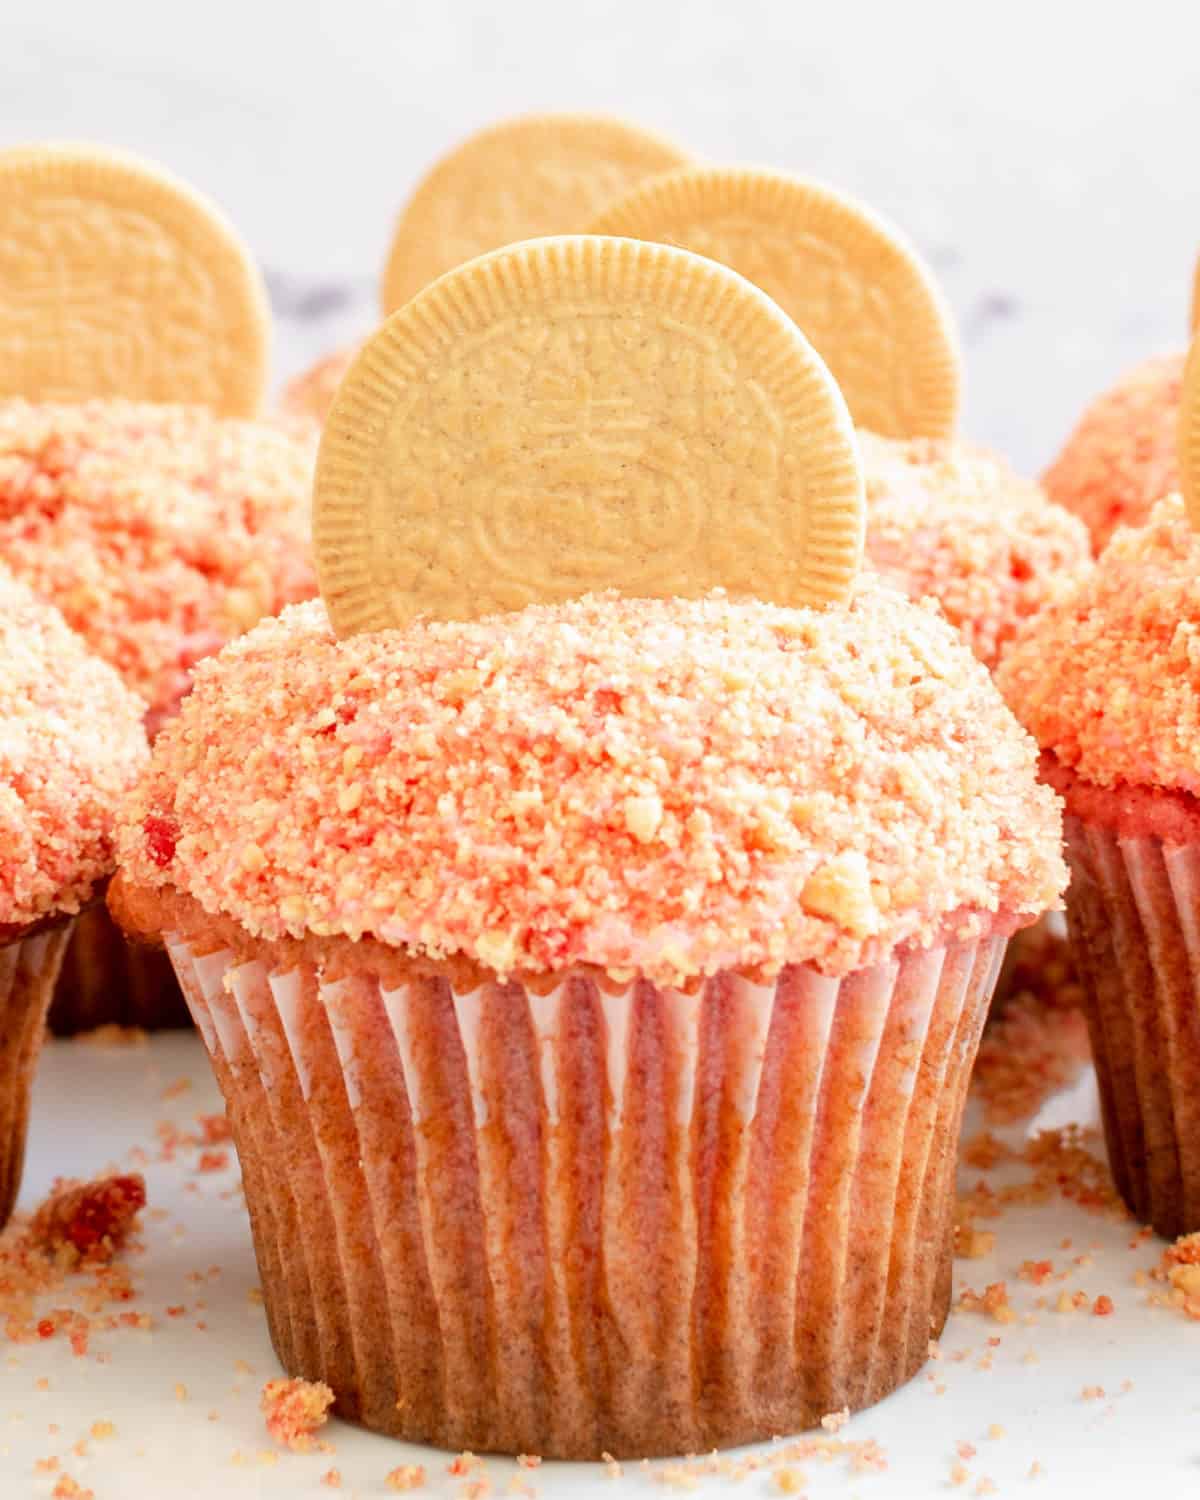 A strawberry cupcake up close with crunch topping.